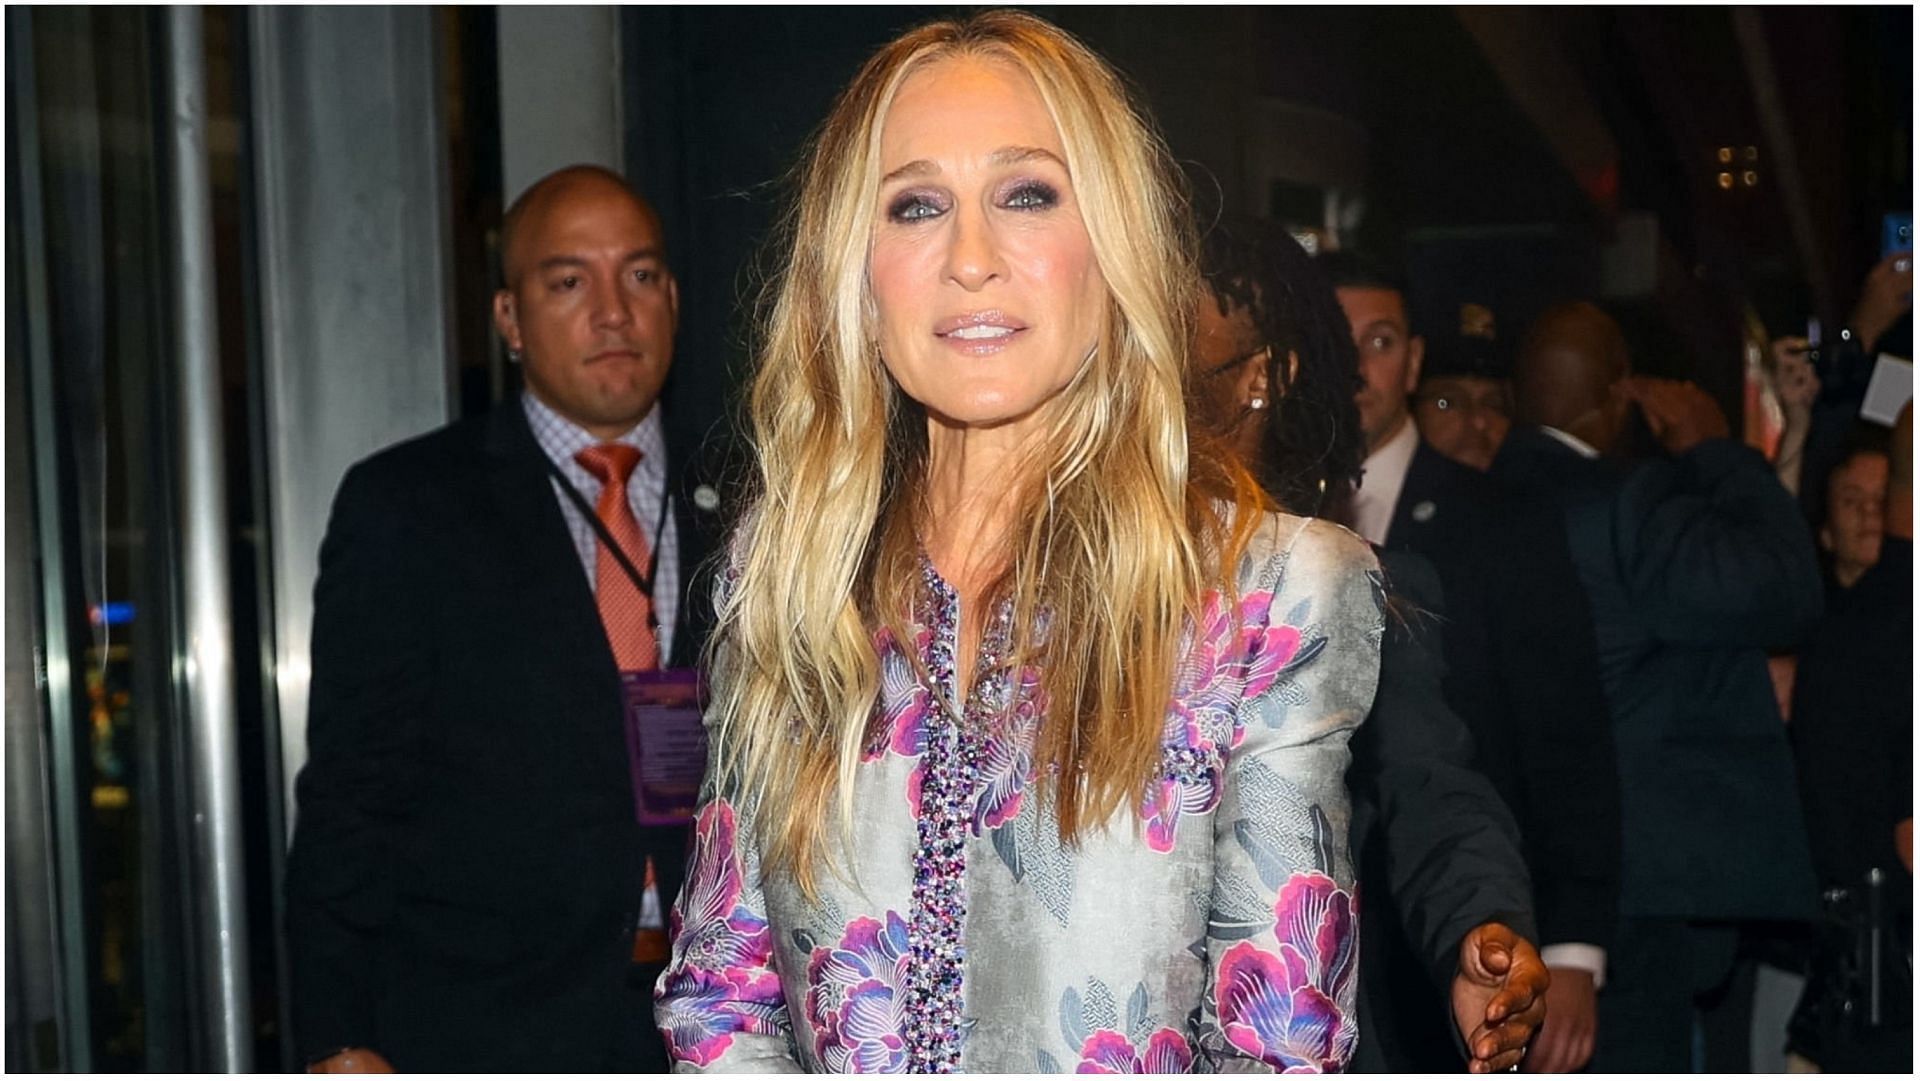 Sarah Jessica Parker paid tribute to her late stepfather (Image via Jose Perez/Getty Images)